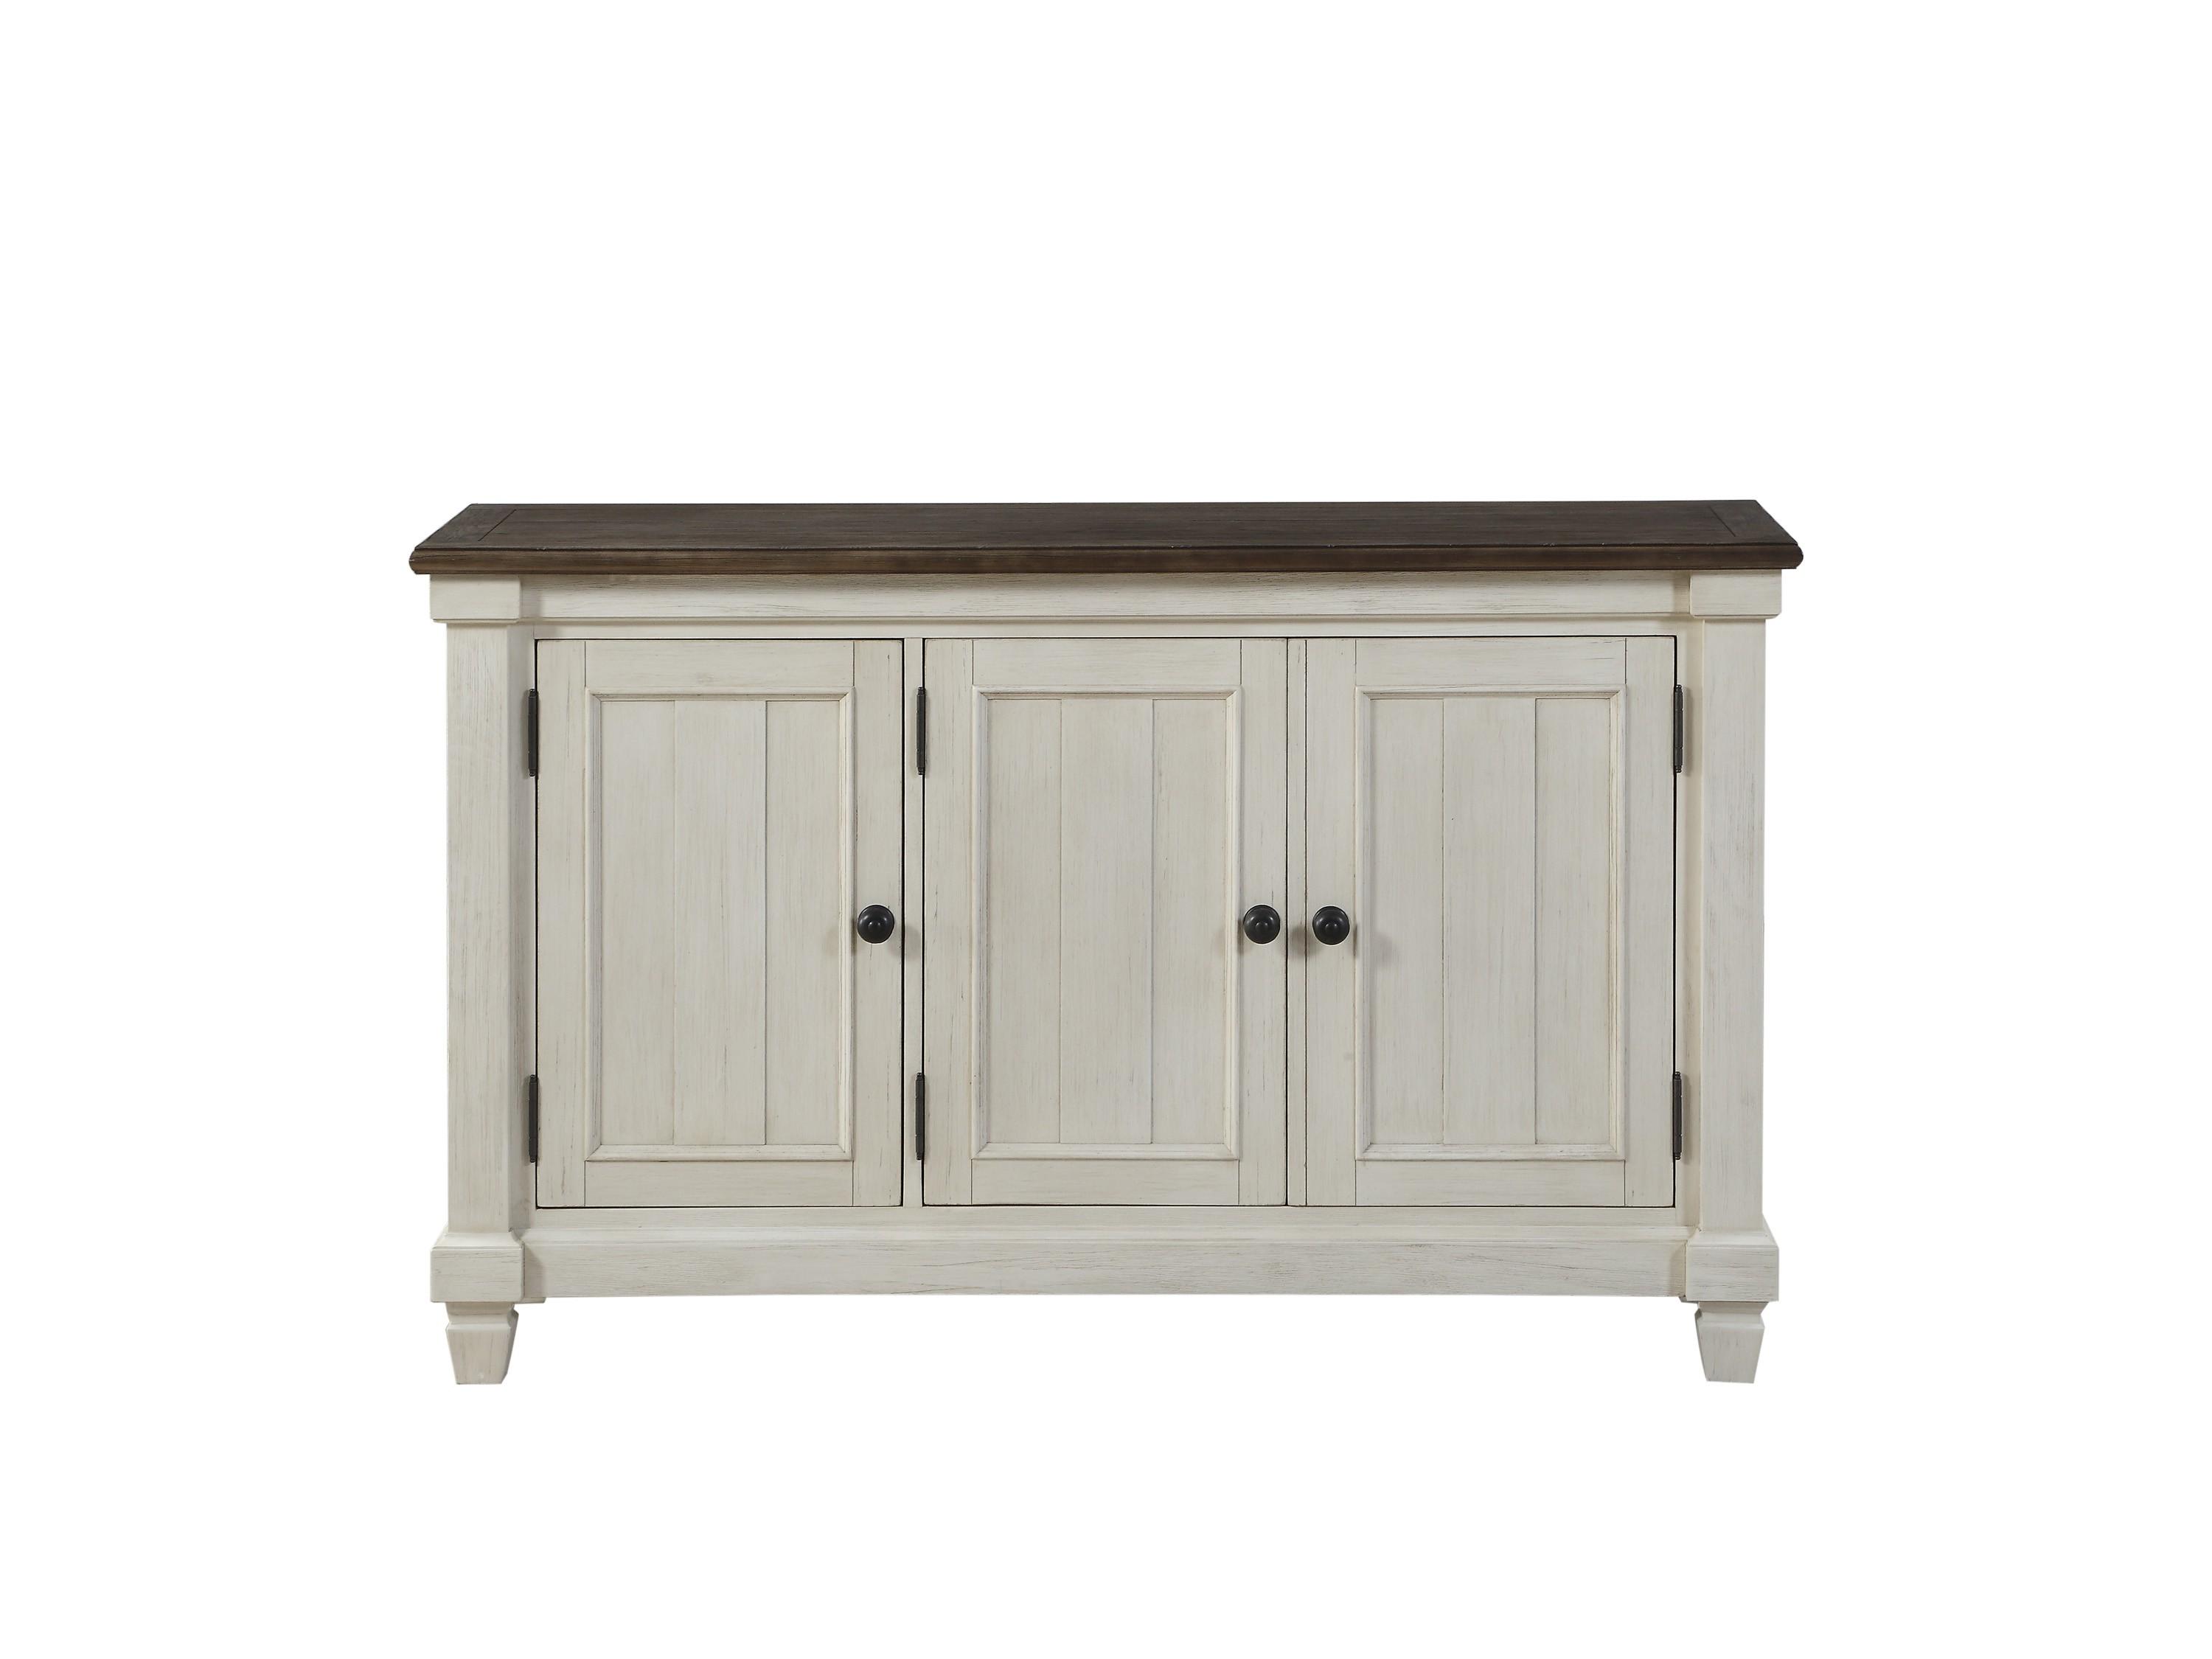 Casual Server Granby Collection Server 5627NW-40-S 5627NW-40-S in Antique White 